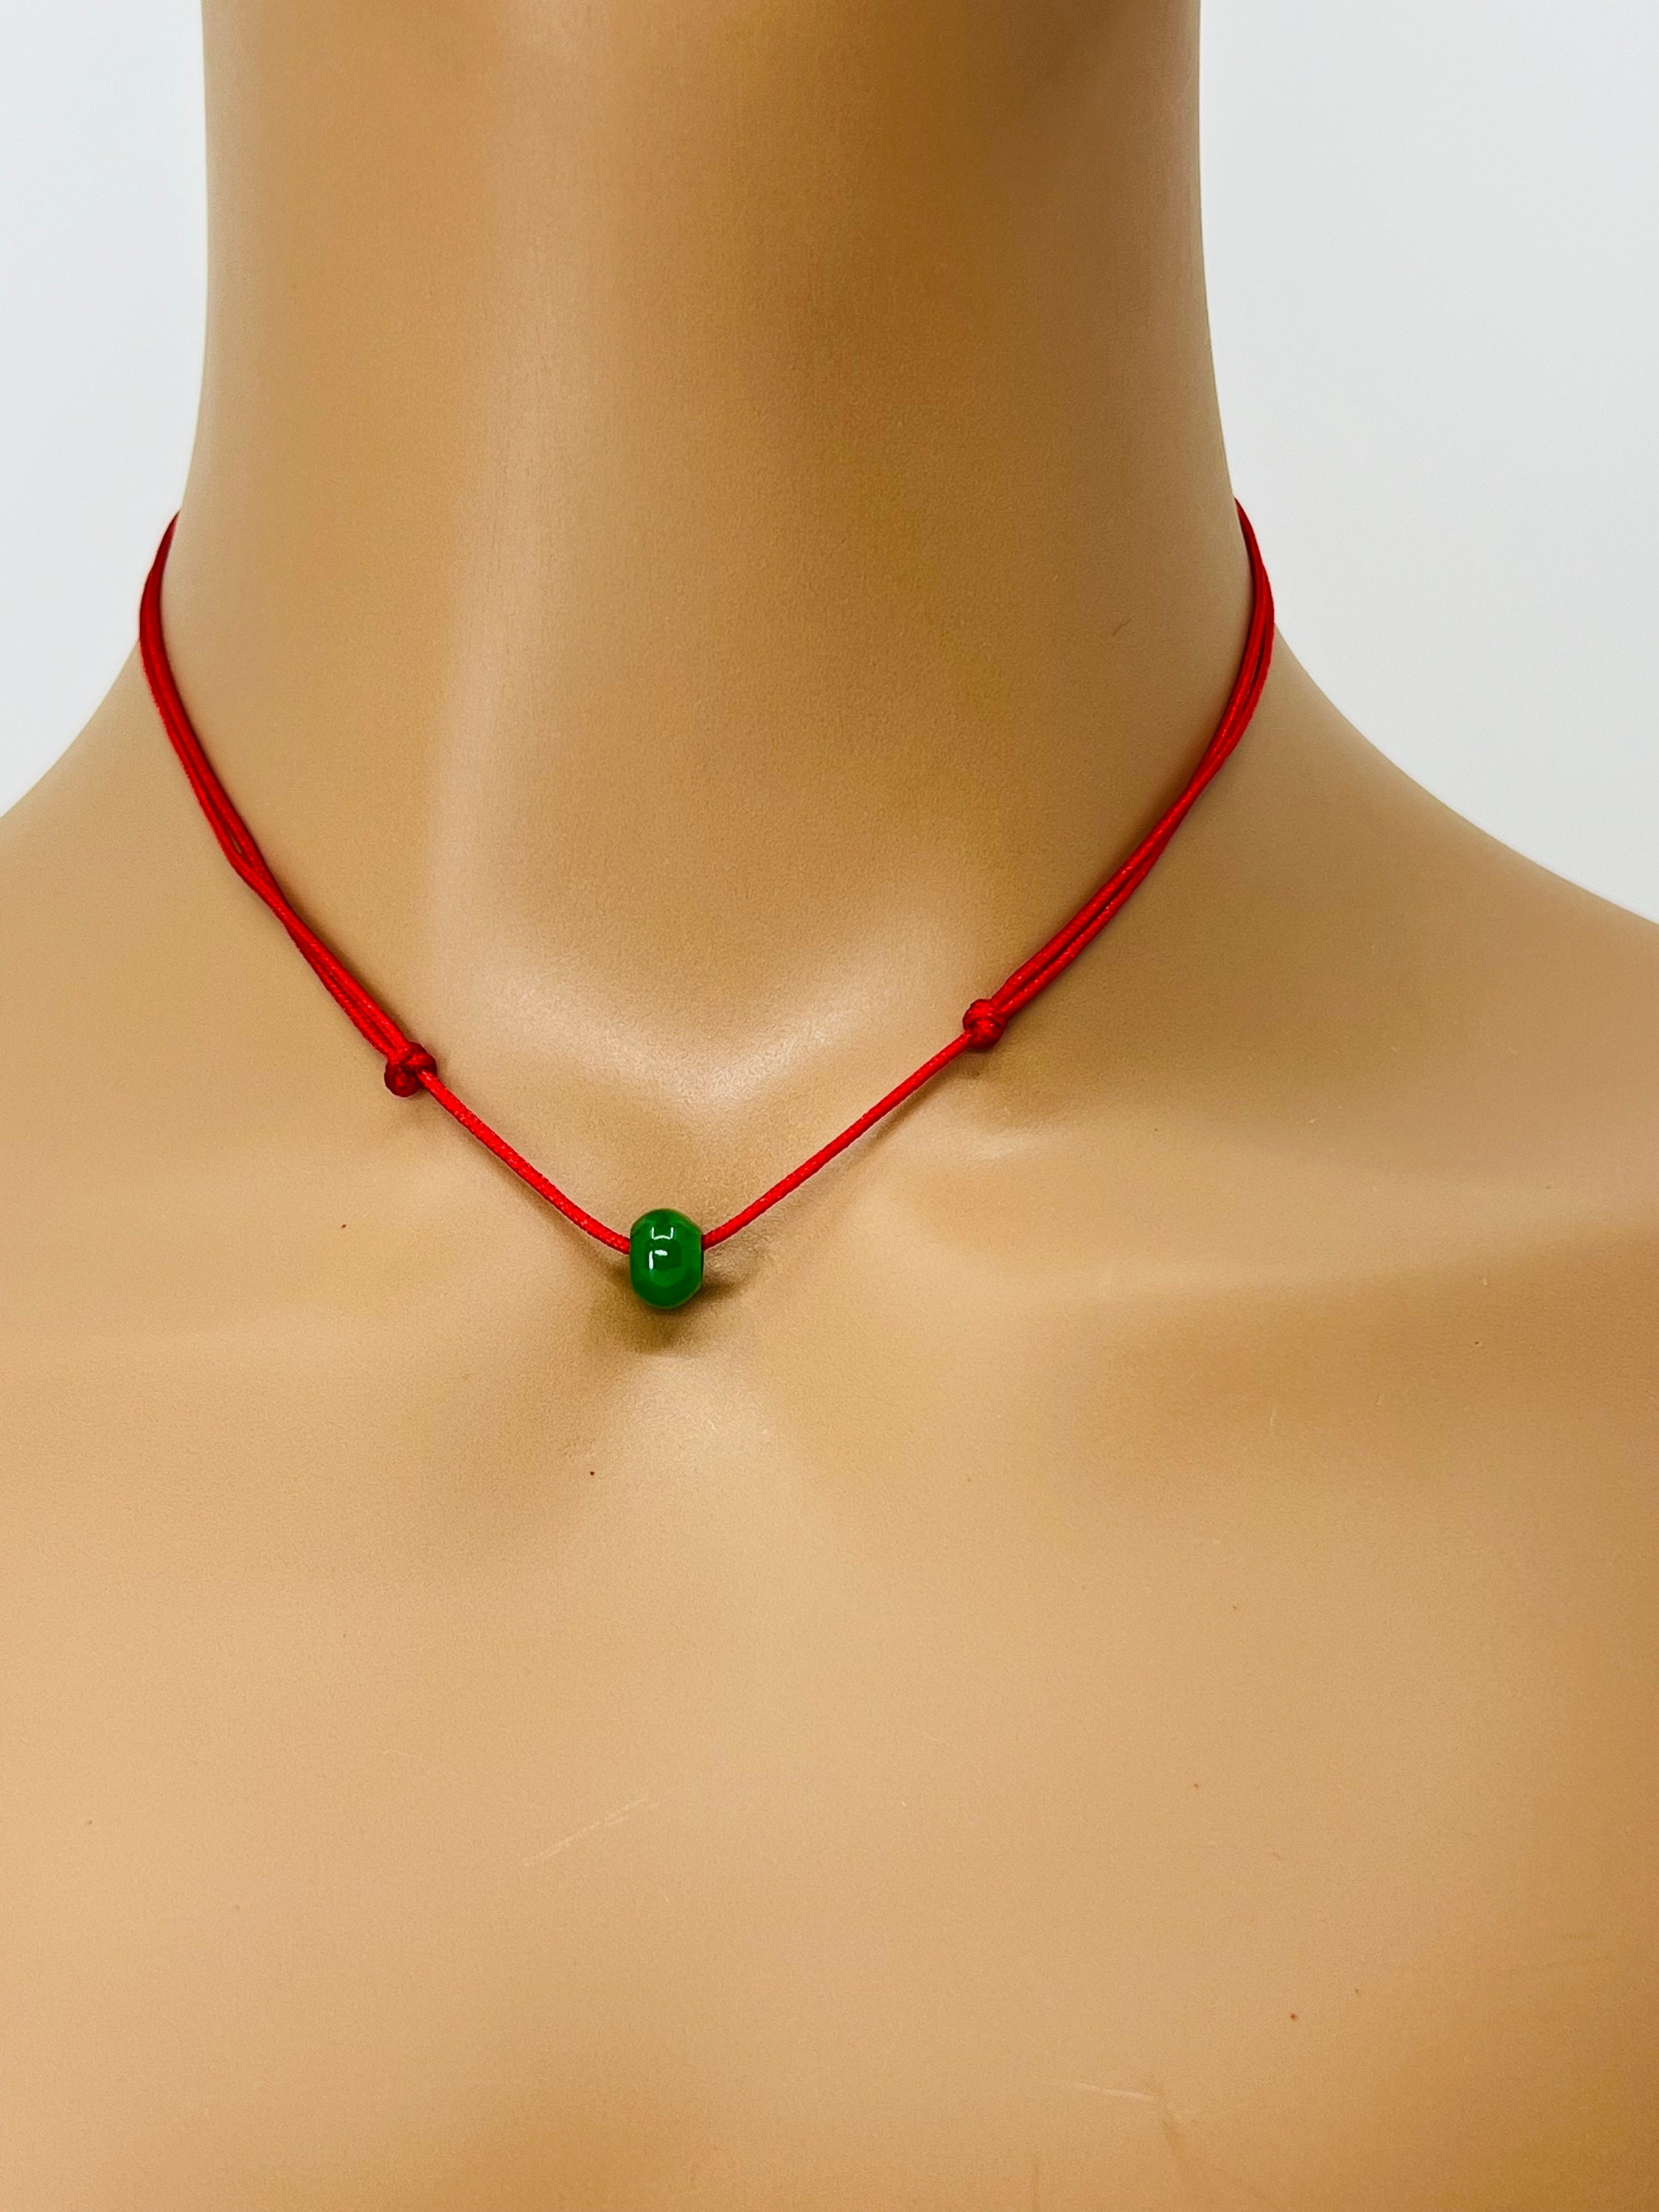 Fast Shipping Natural Hetian Jade Good Fortune Lucky Red String Necklace  Full Moon Gift Jade Money Miyue Gift Box Xiangyun - Shop Cheng Necklaces -  Pinkoi